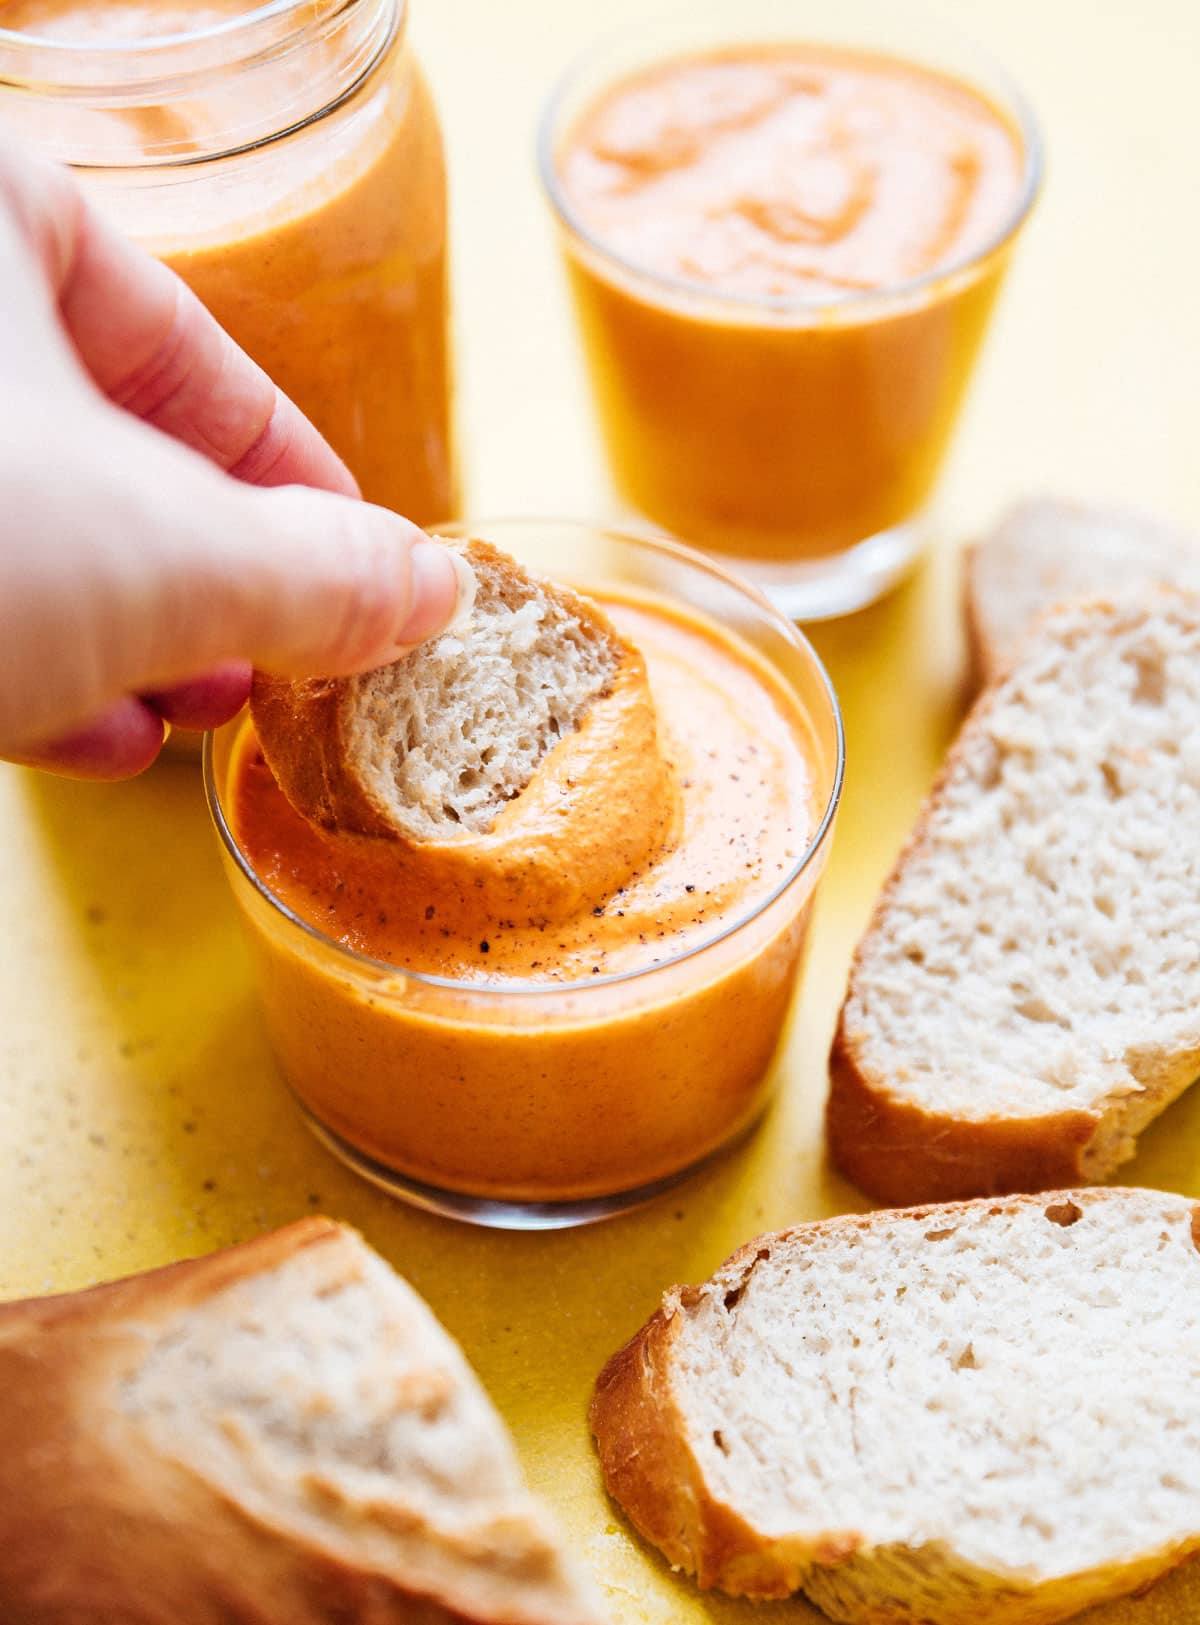 Romesco sauce recipe in a jar with a piece of bread.